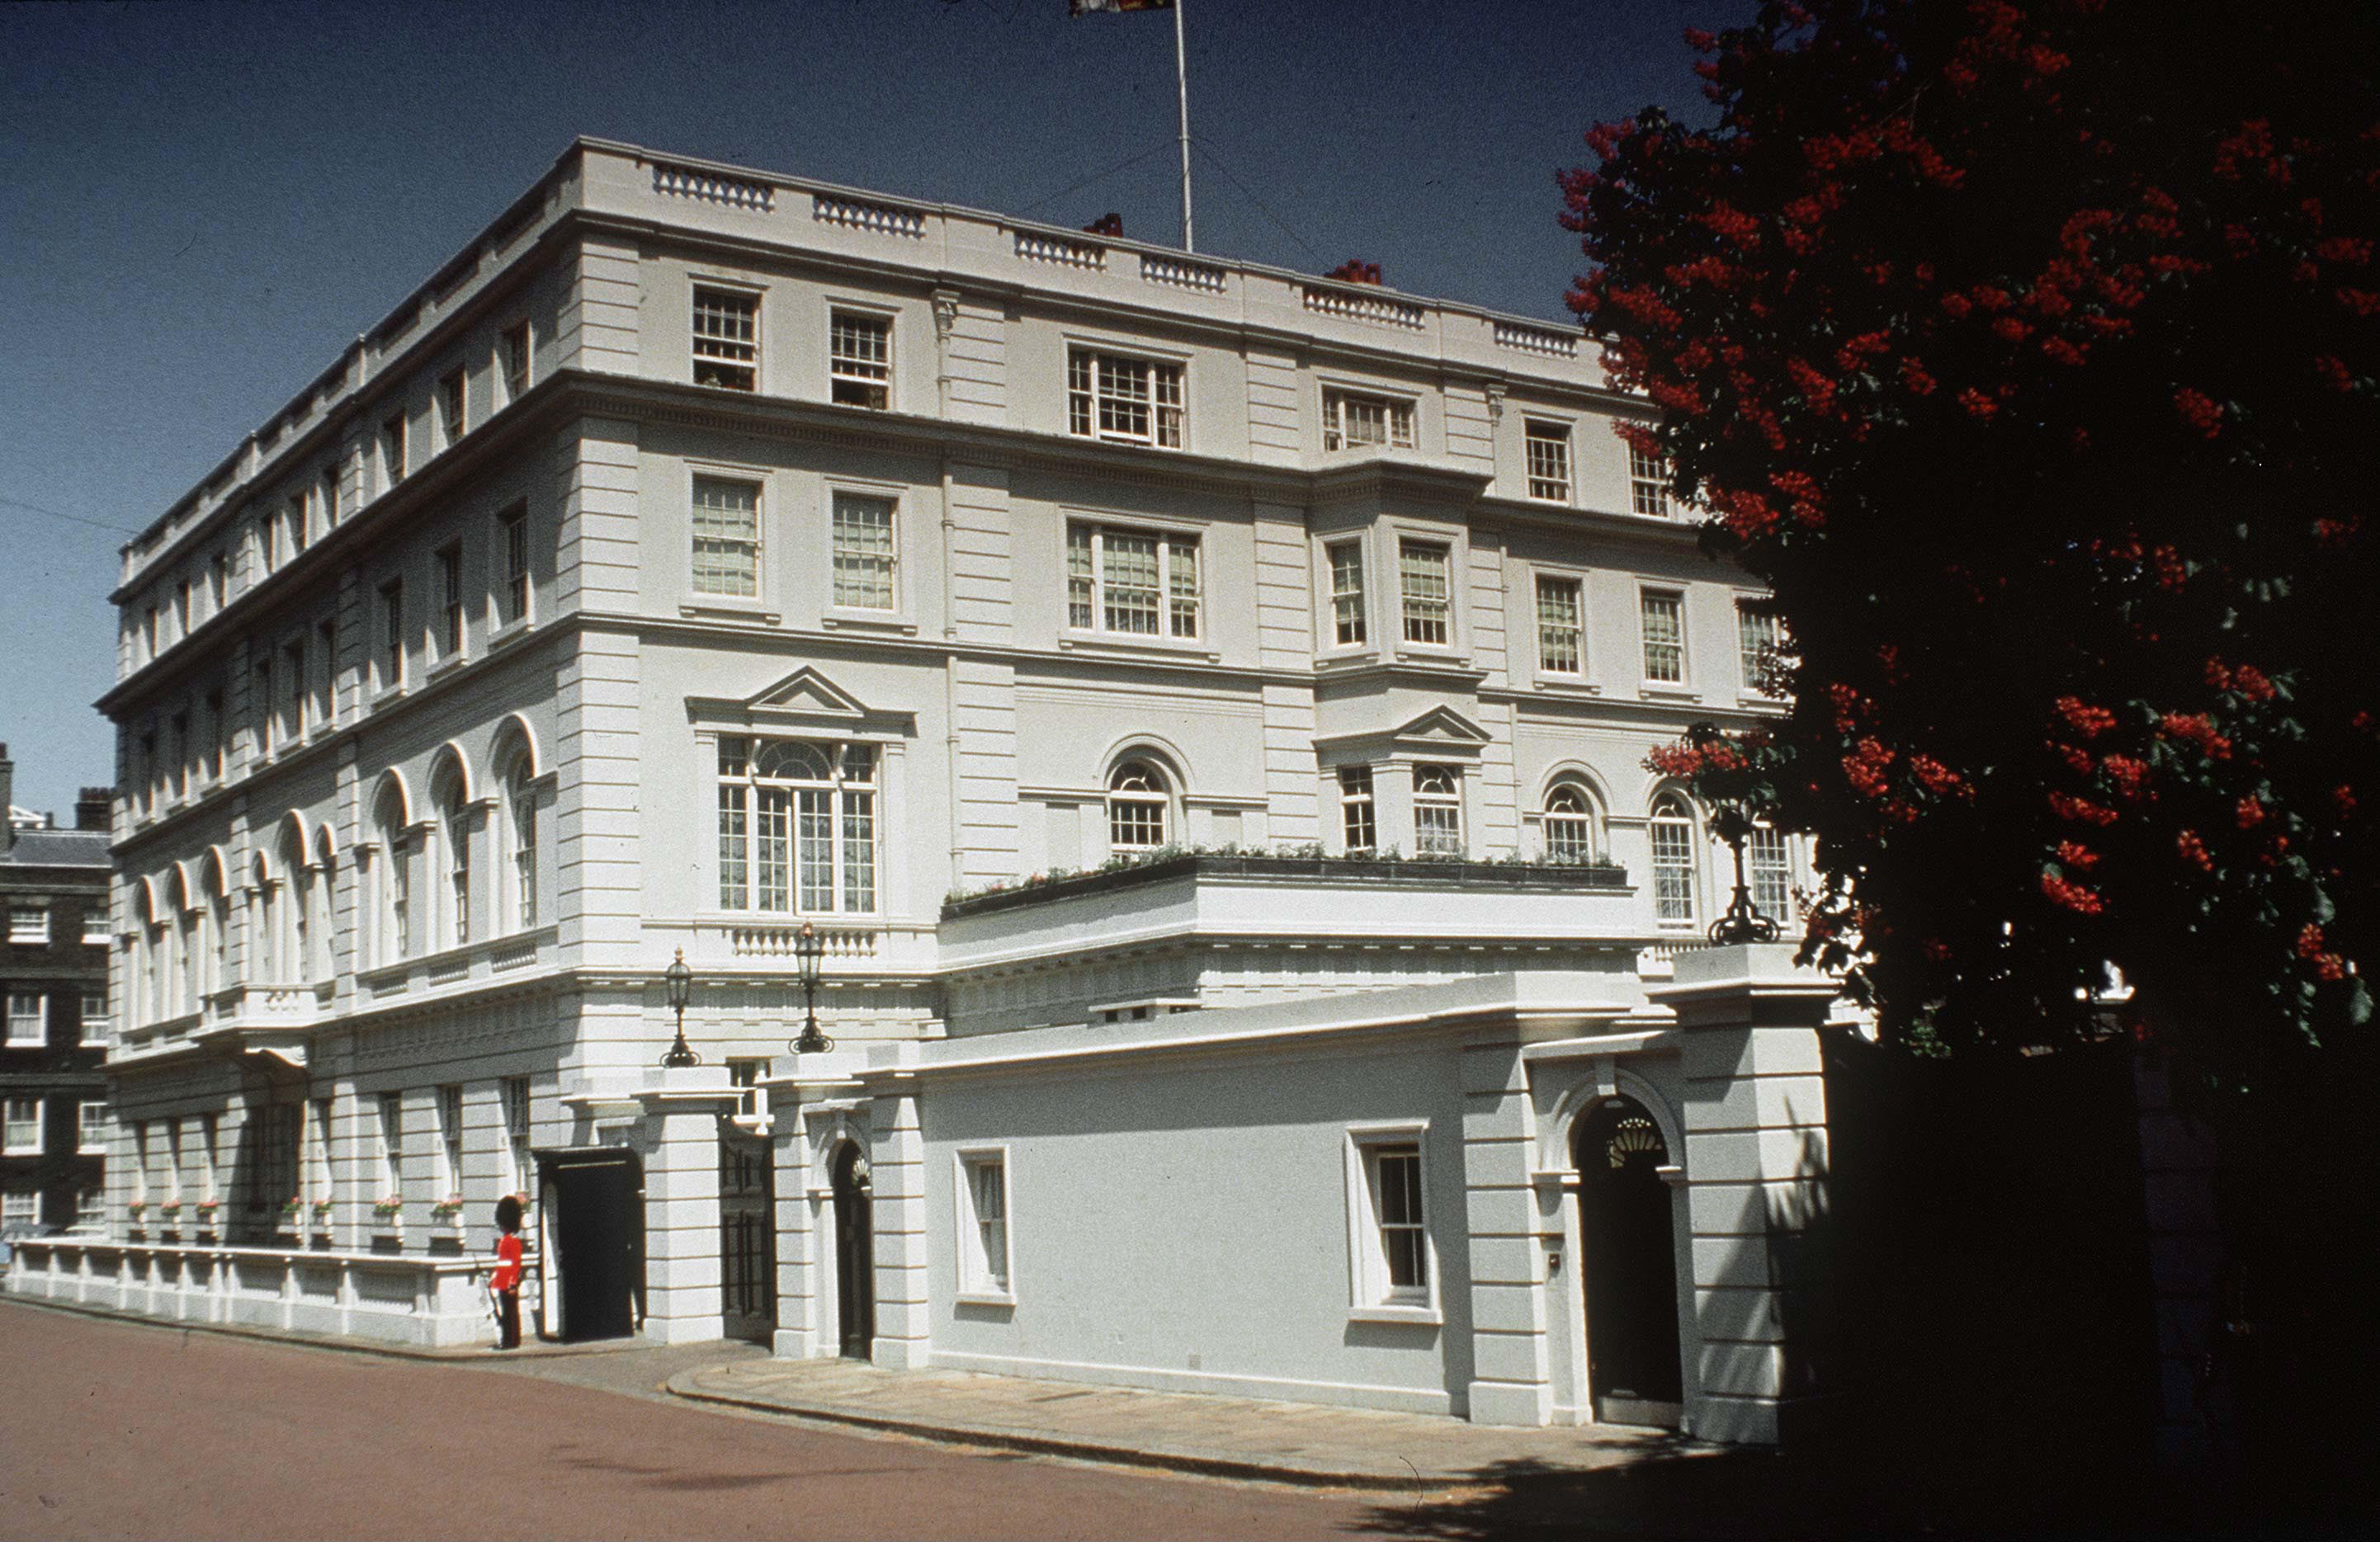 View of Clarence House from the street